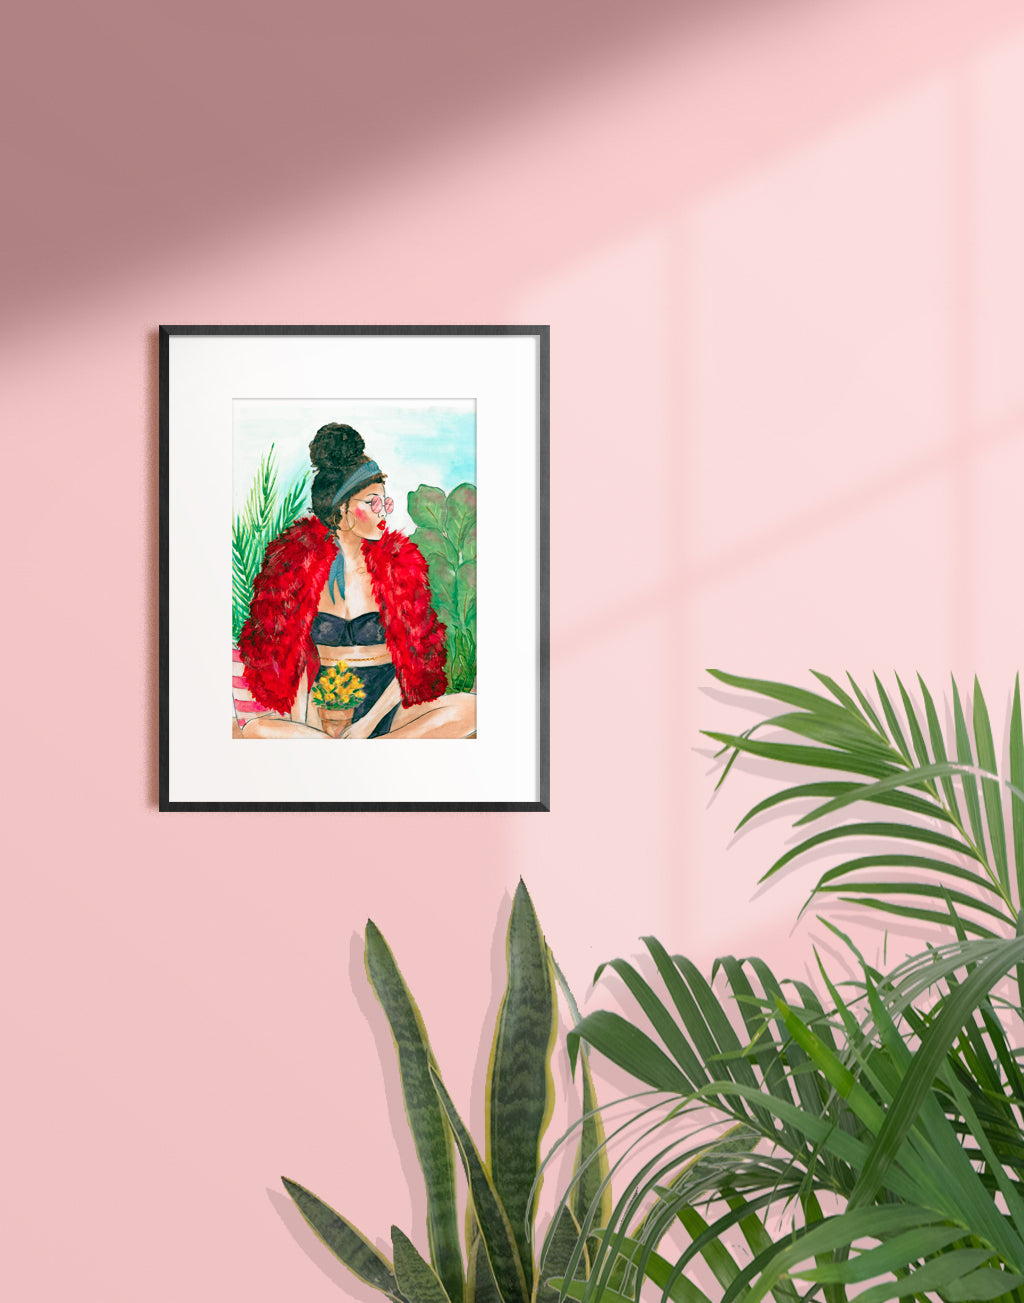 Framed illustration of a woman with her curly hair in a bun surrounded by plants and wearing a red fur jacket, black bra and panties by Tatiana Poblah